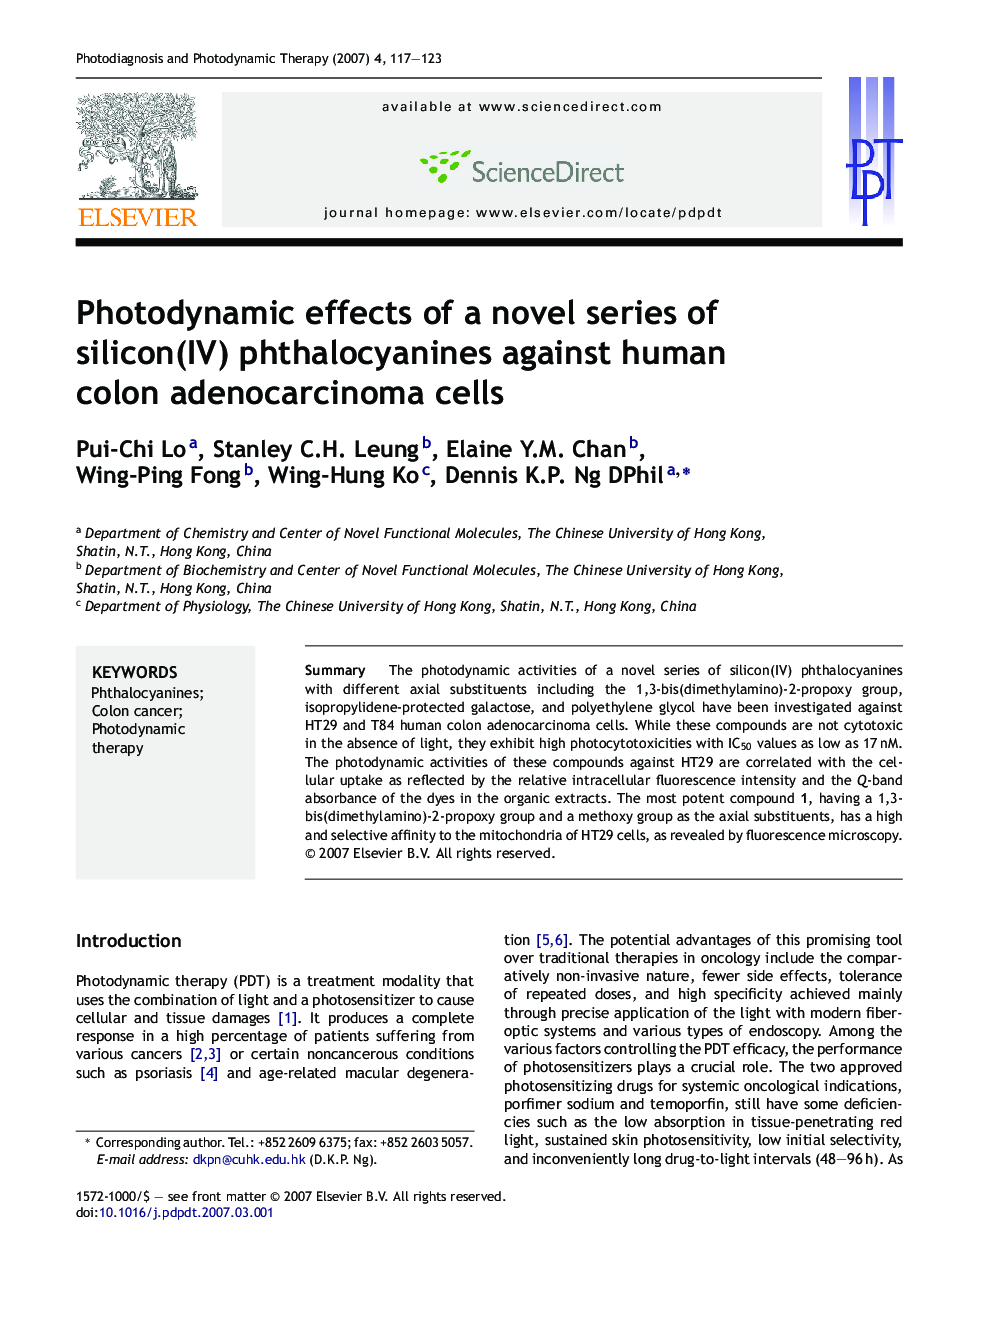 Photodynamic effects of a novel series of silicon(IV) phthalocyanines against human colon adenocarcinoma cells